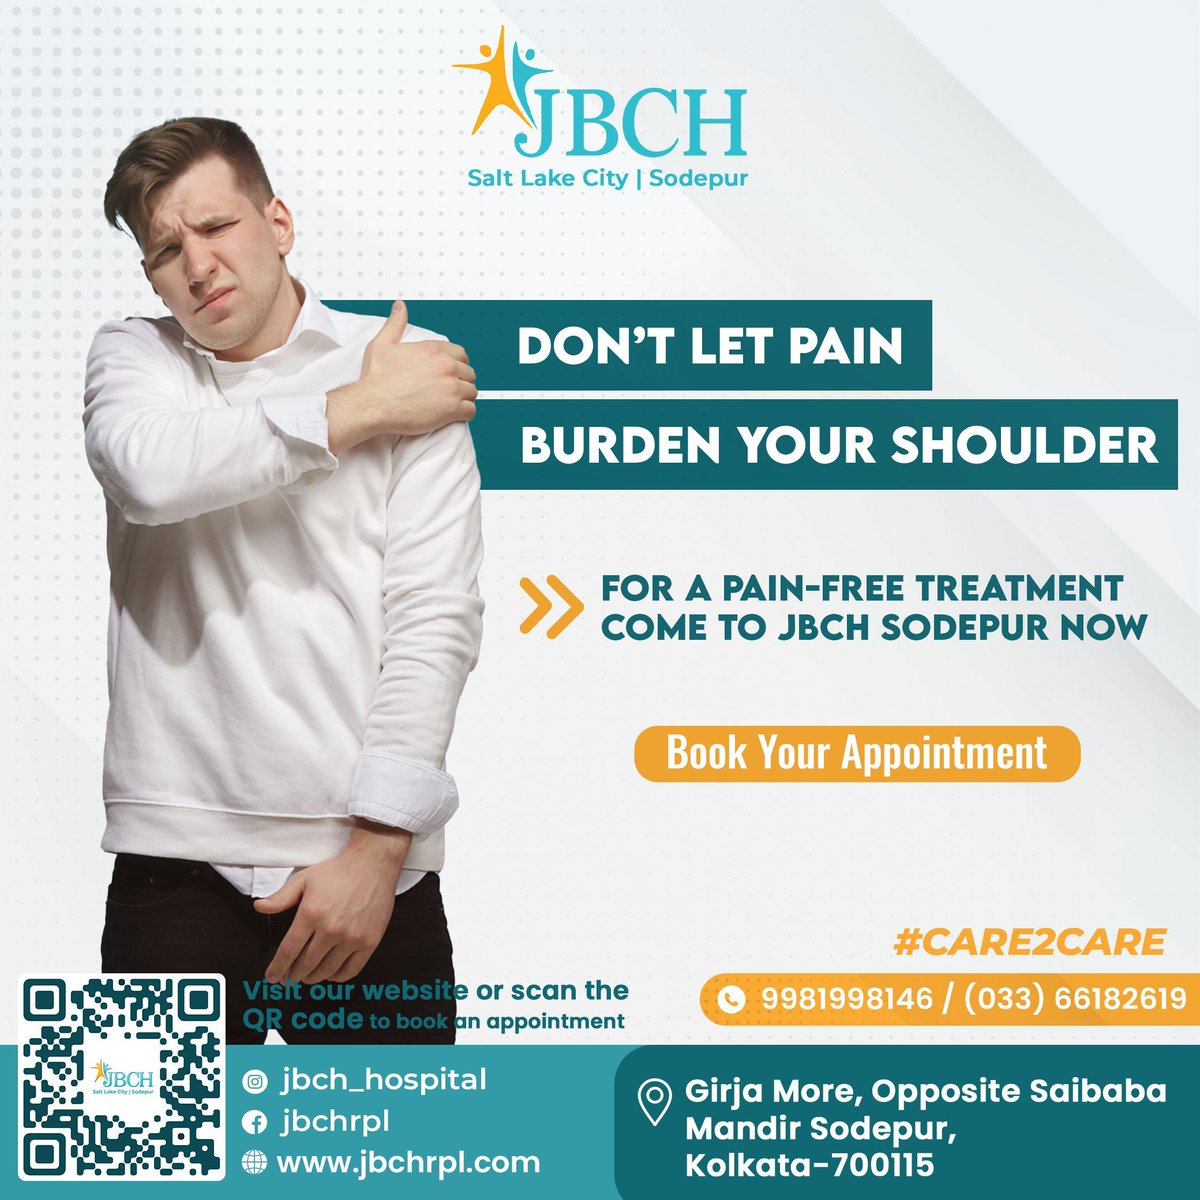 End your struggle with shoulder pain. 

Reach out to the experts at JBCH Sodepur. Book Your Appointment 📝
Visit our website for more information. Link in bio.
.
.
#ShoulderRelief #PainFree #ShoulderHealth #PainFreeLiving #JointCare #CareToCare #JBCHHospital #KolkataHospital